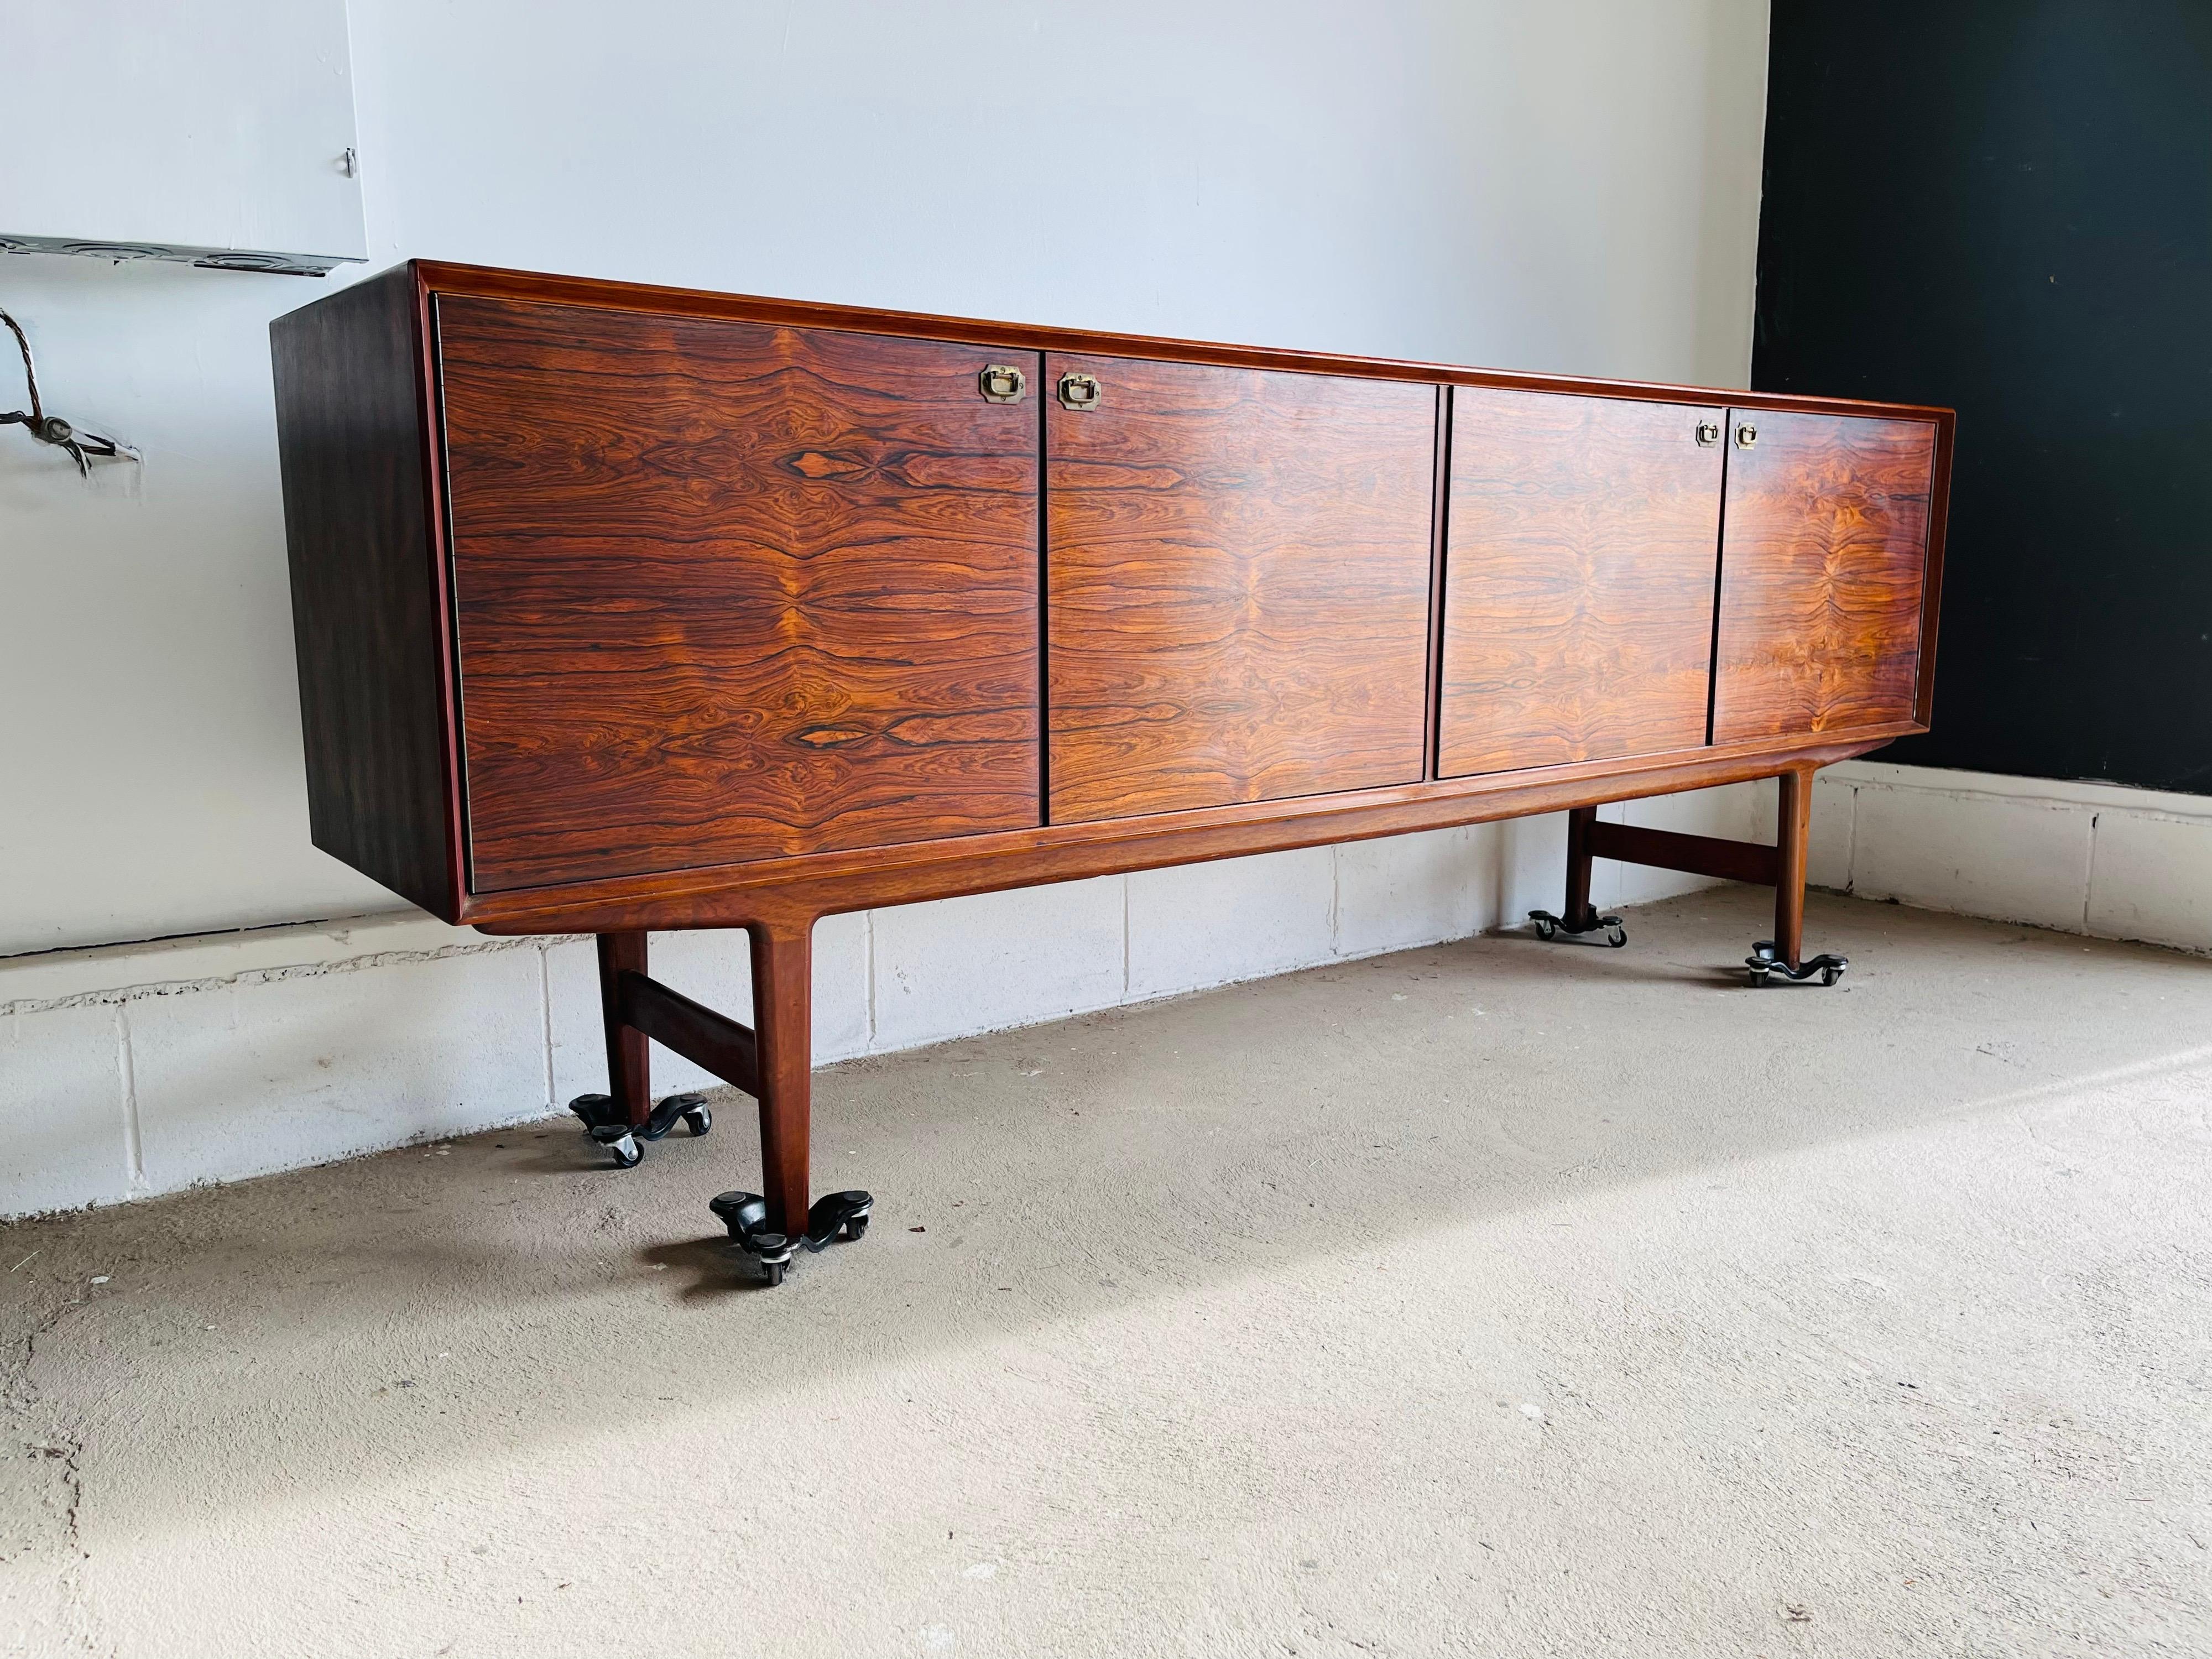 Here is a stunning and rare mid-century modern Rosewood sideboard / credenza by Fredrik Kayser of Sweden for Viken Mobelfabrik. This gorgeous credenza features two sets or doors that open to plenty of storage space and 5 rosewood drawer behind the